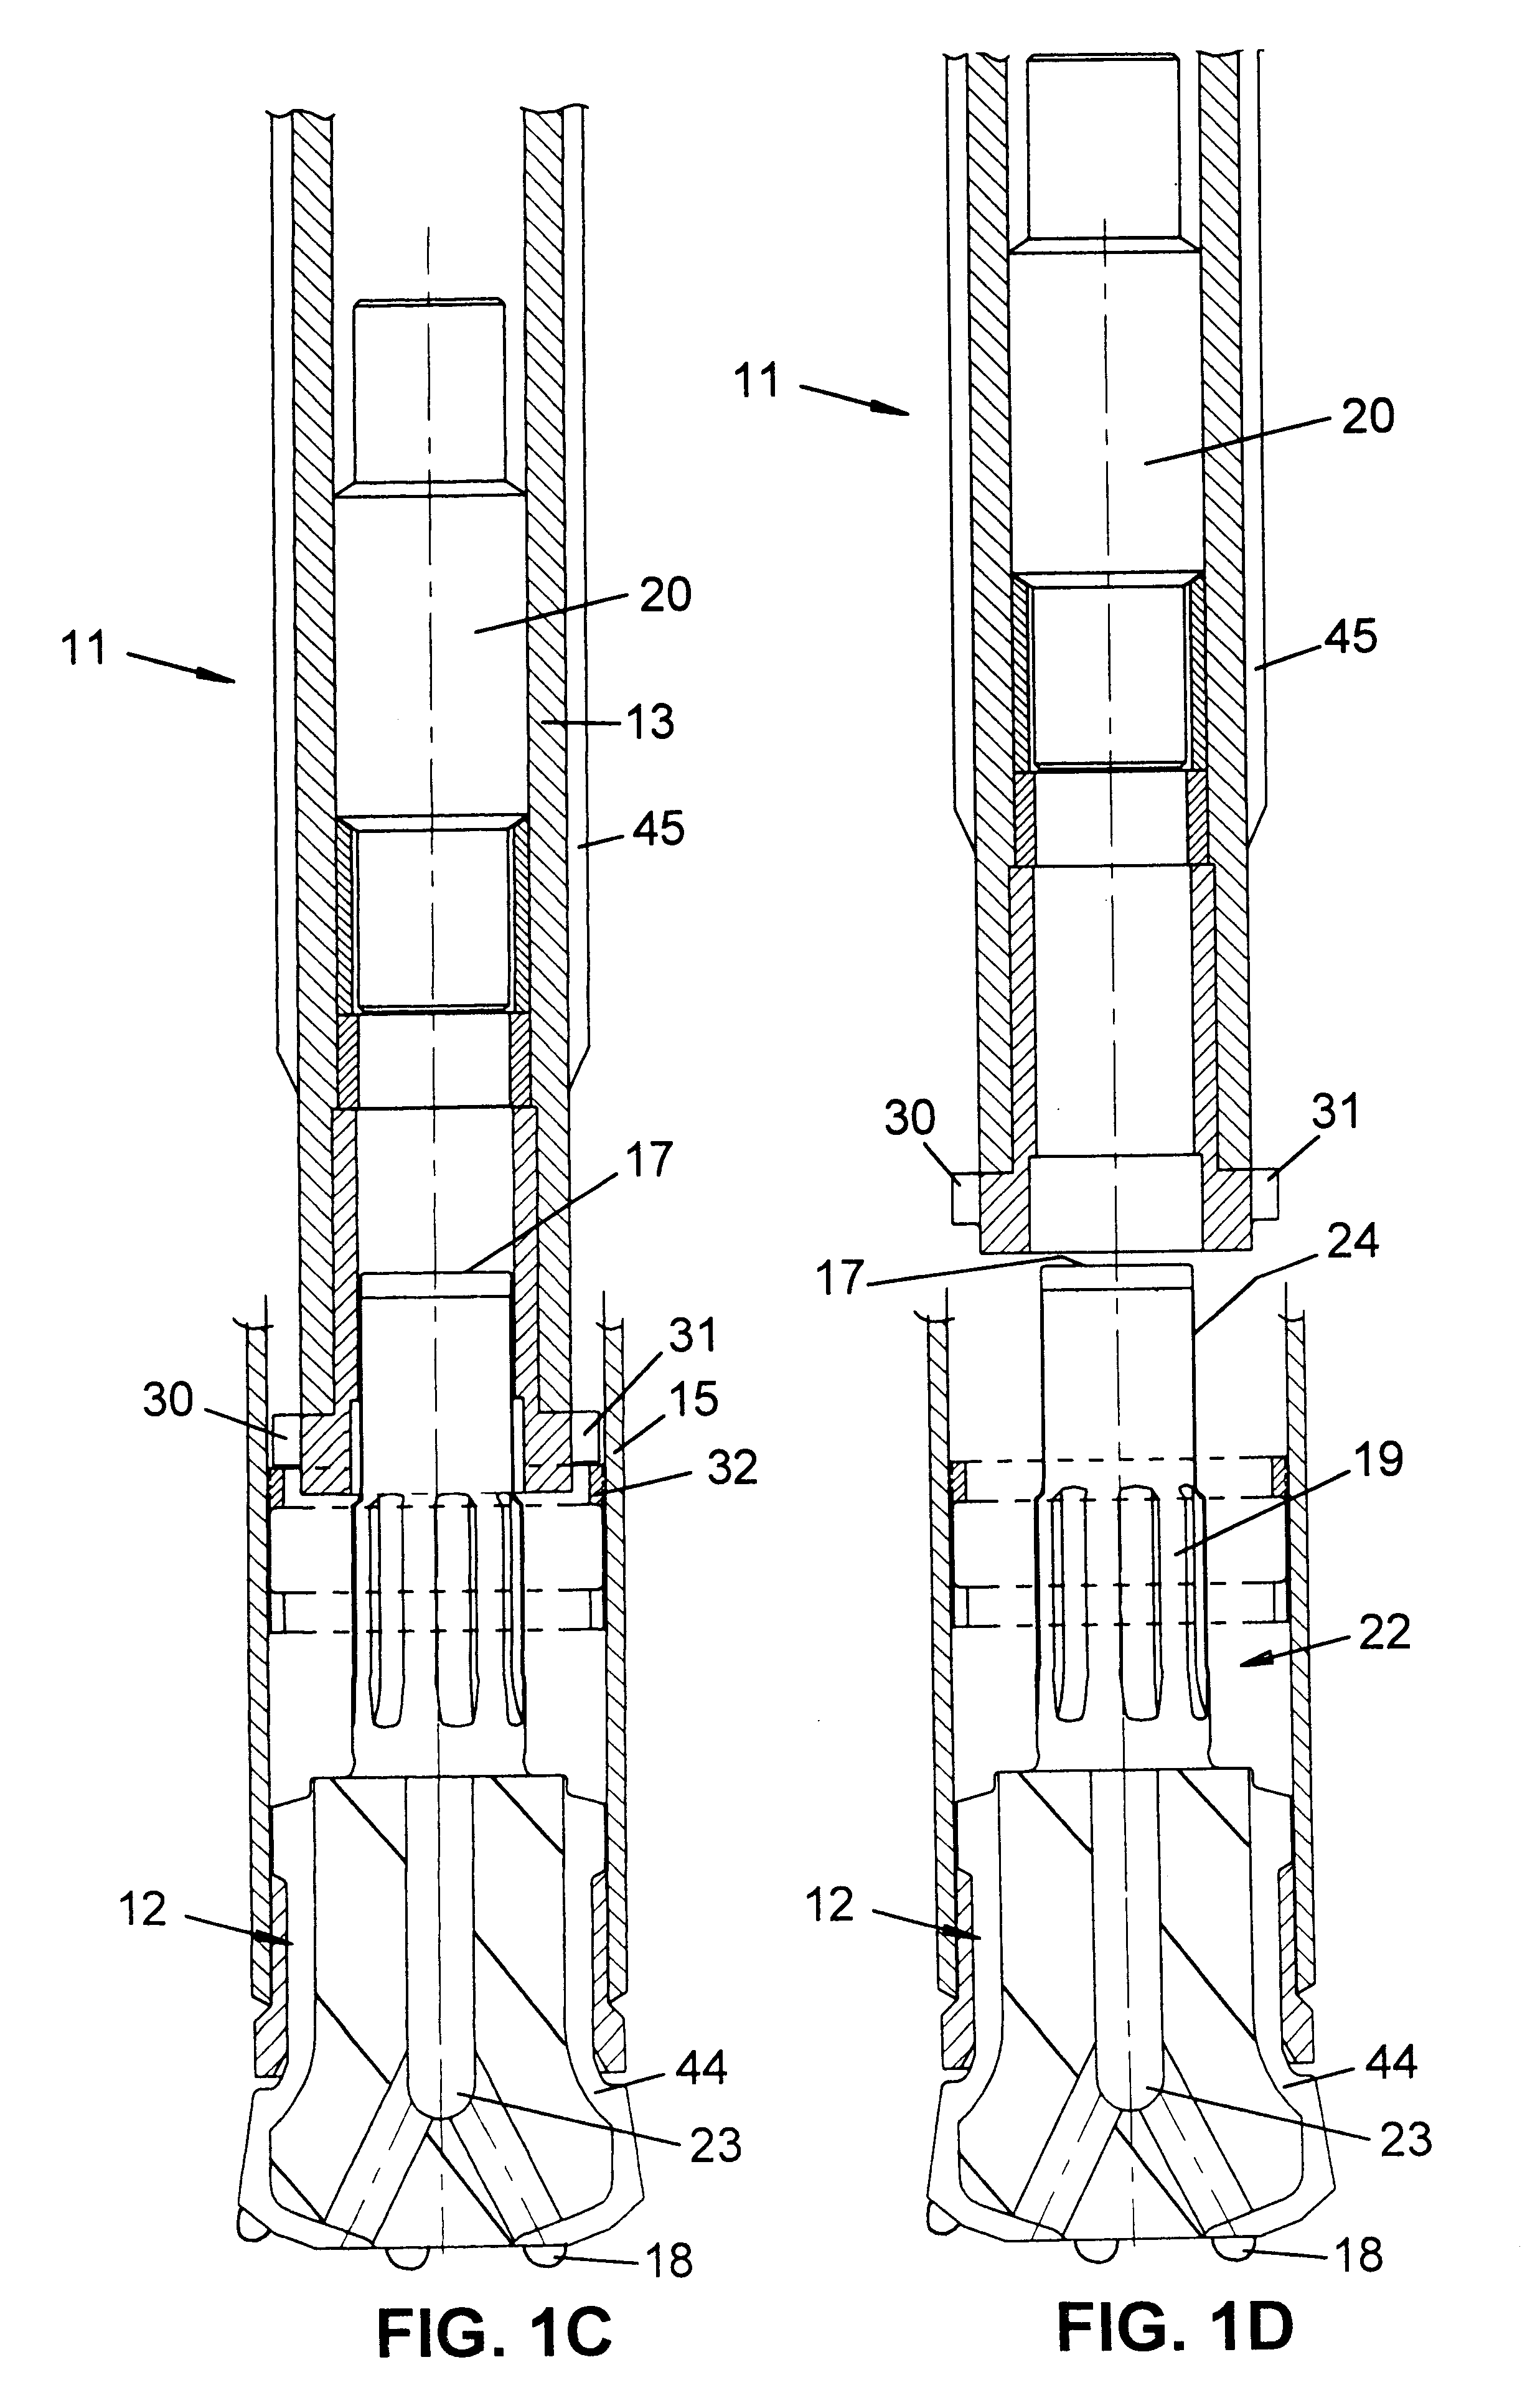 Overburden drilling apparatus having a down-the-hole hammer separatable from an outer casing/drill bit unit